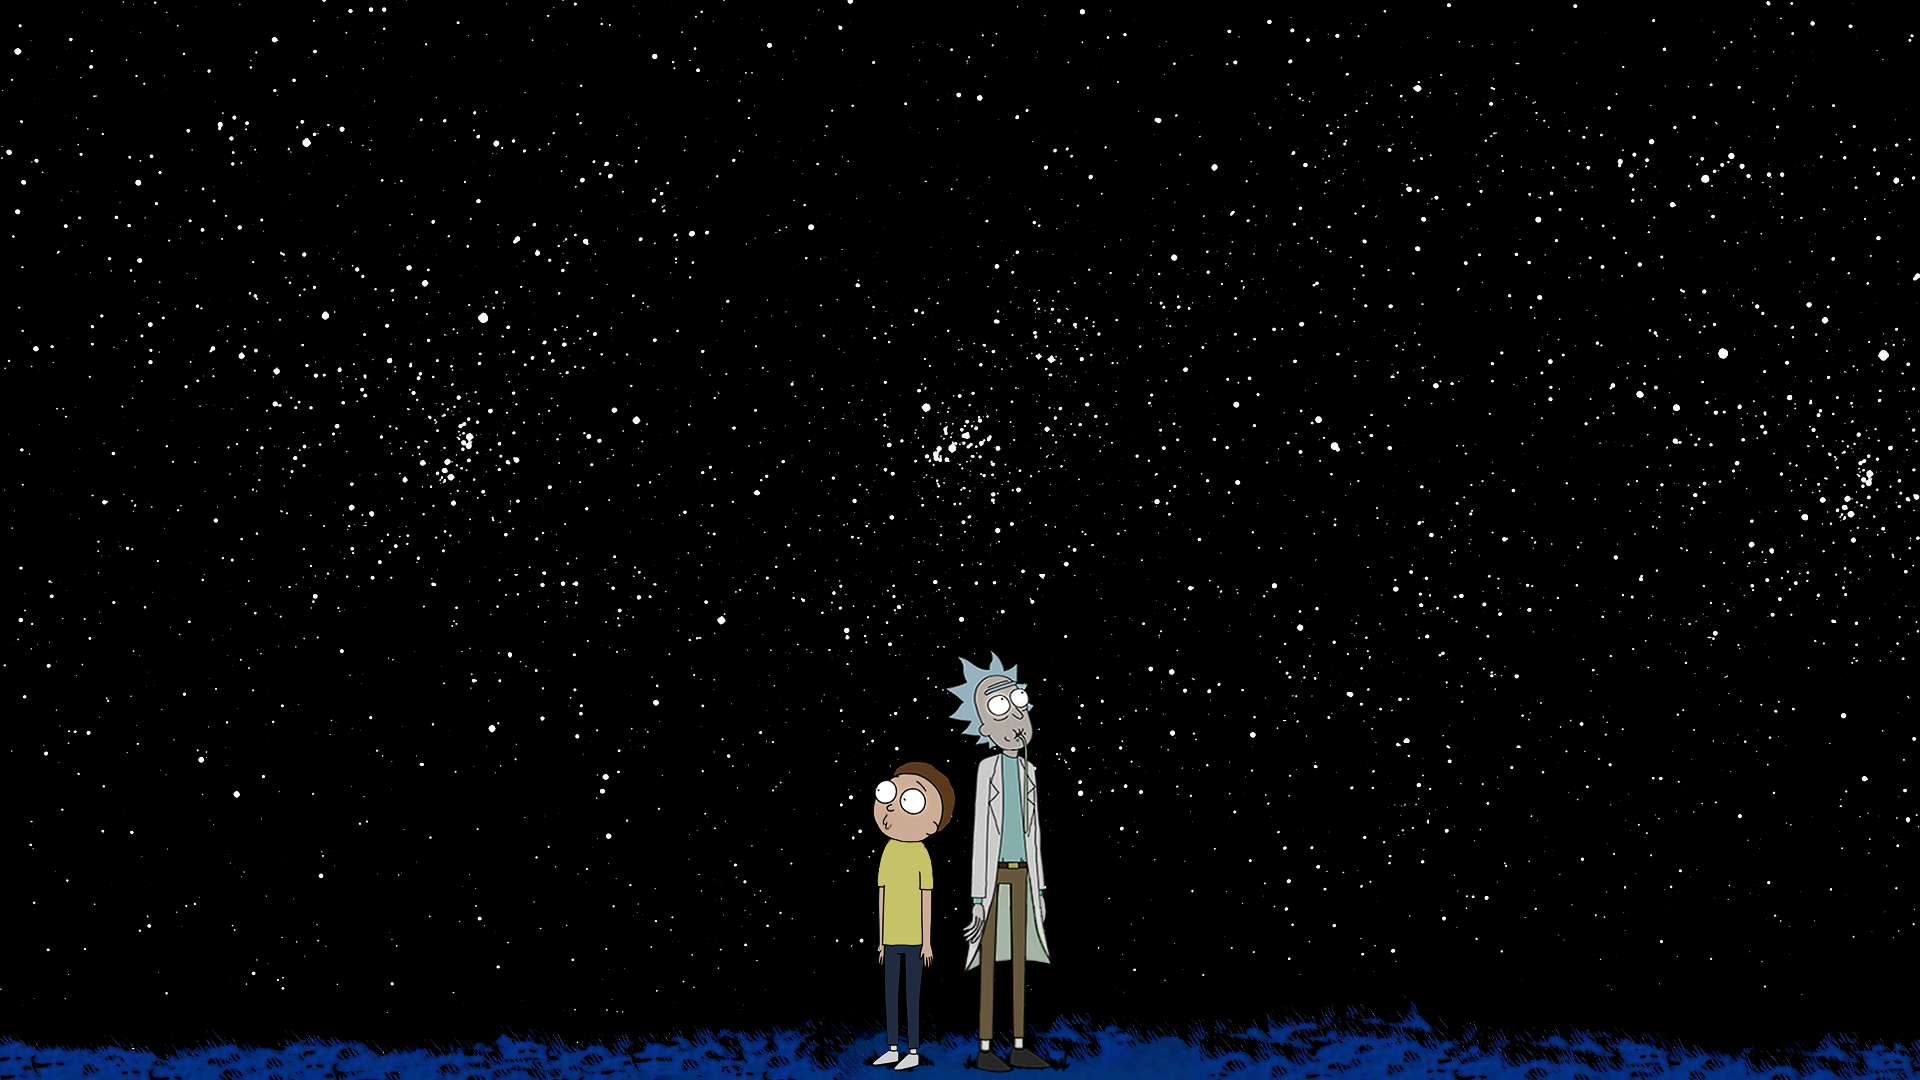 Amoled Black Rick And Morty Wallpapers - Wallpaper Cave